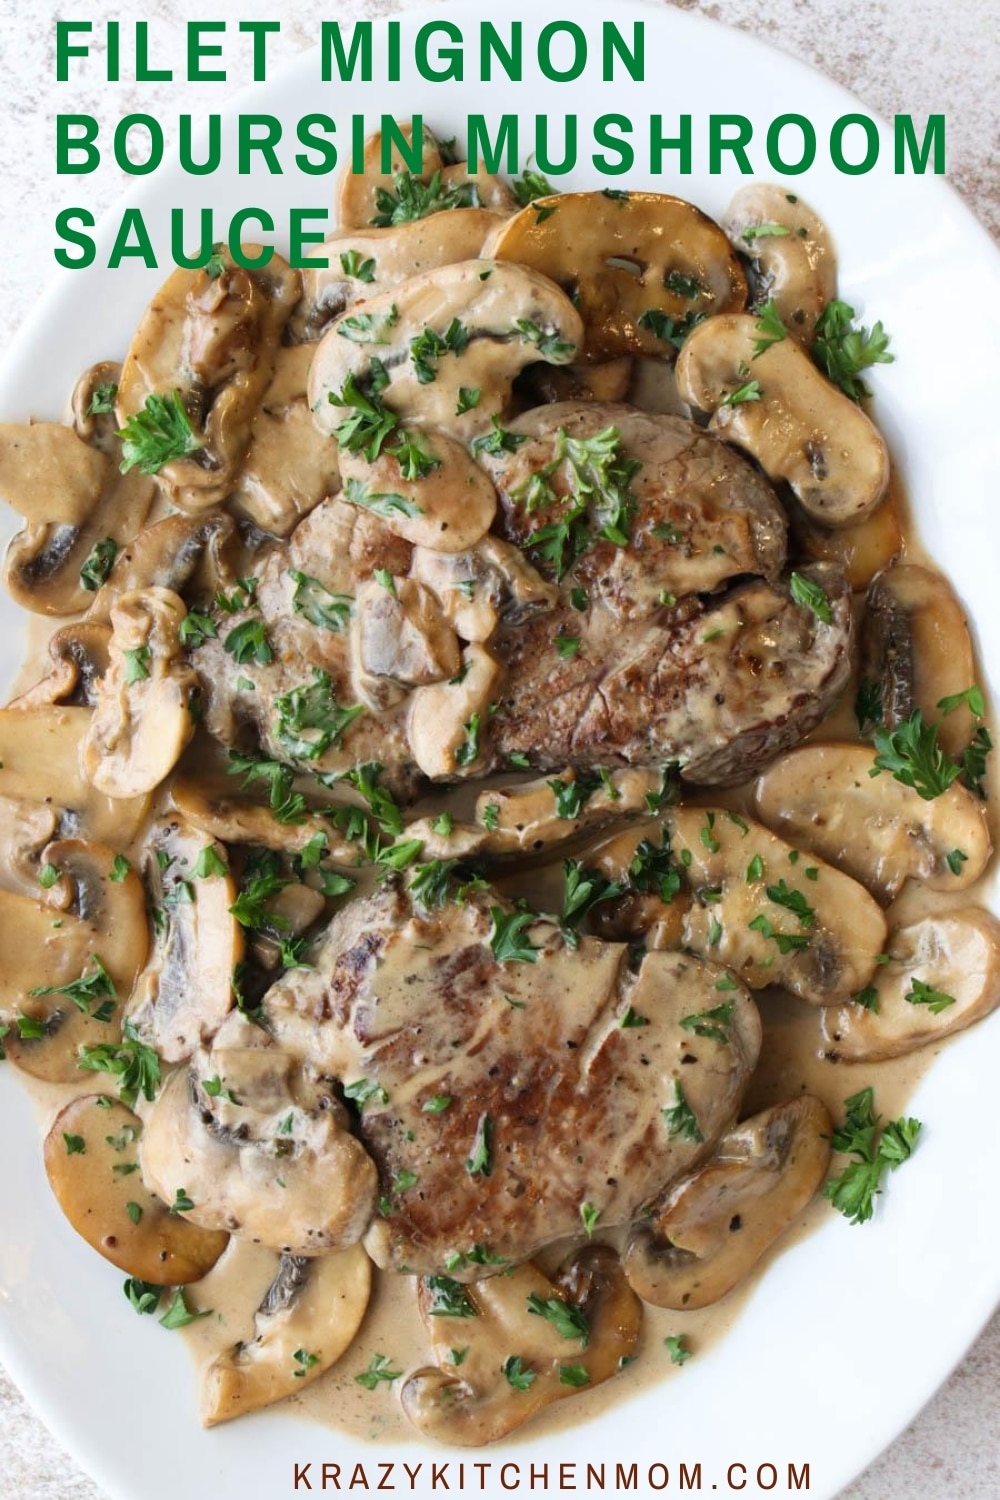 Tender filet mignon steaks smothered in a creamy, rich mushroom sauce with hints of sweet tanginess and garlic. This is a steak meal that you'd expect to find in a fancy restaurant but it's really super simple to make. via @krazykitchenmom